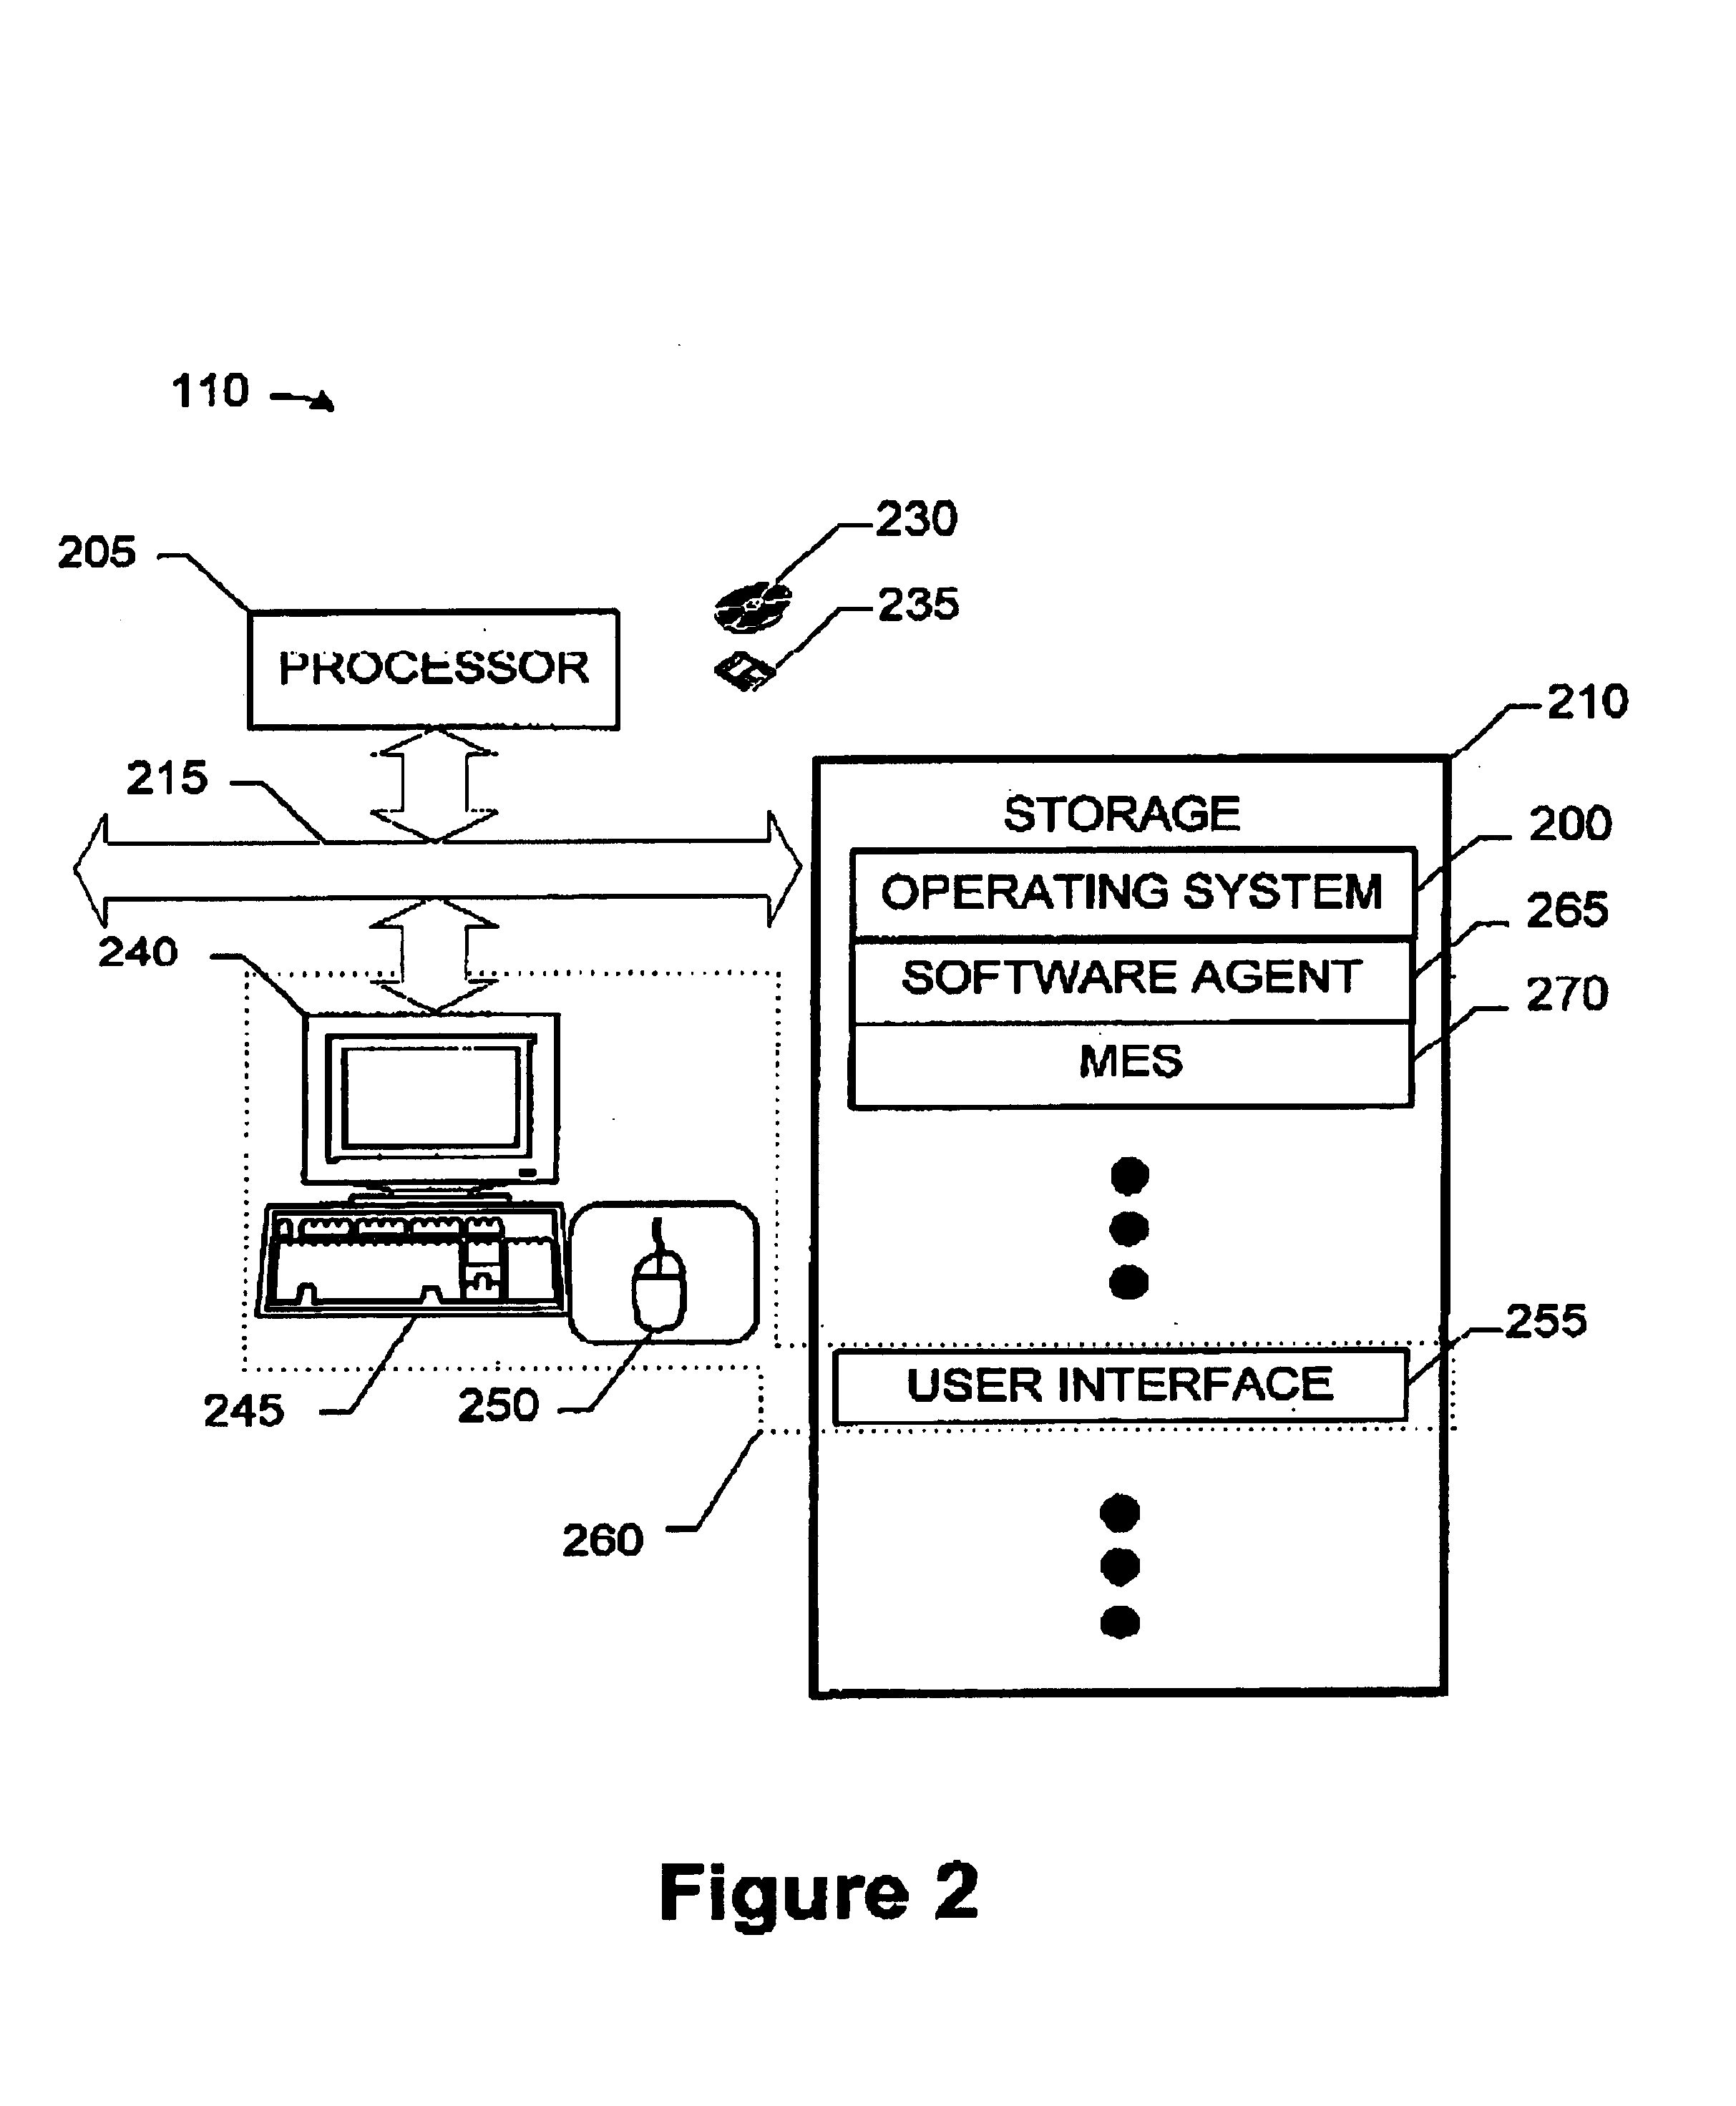 Method and apparatus for reducing scheduling conflicts for a resource